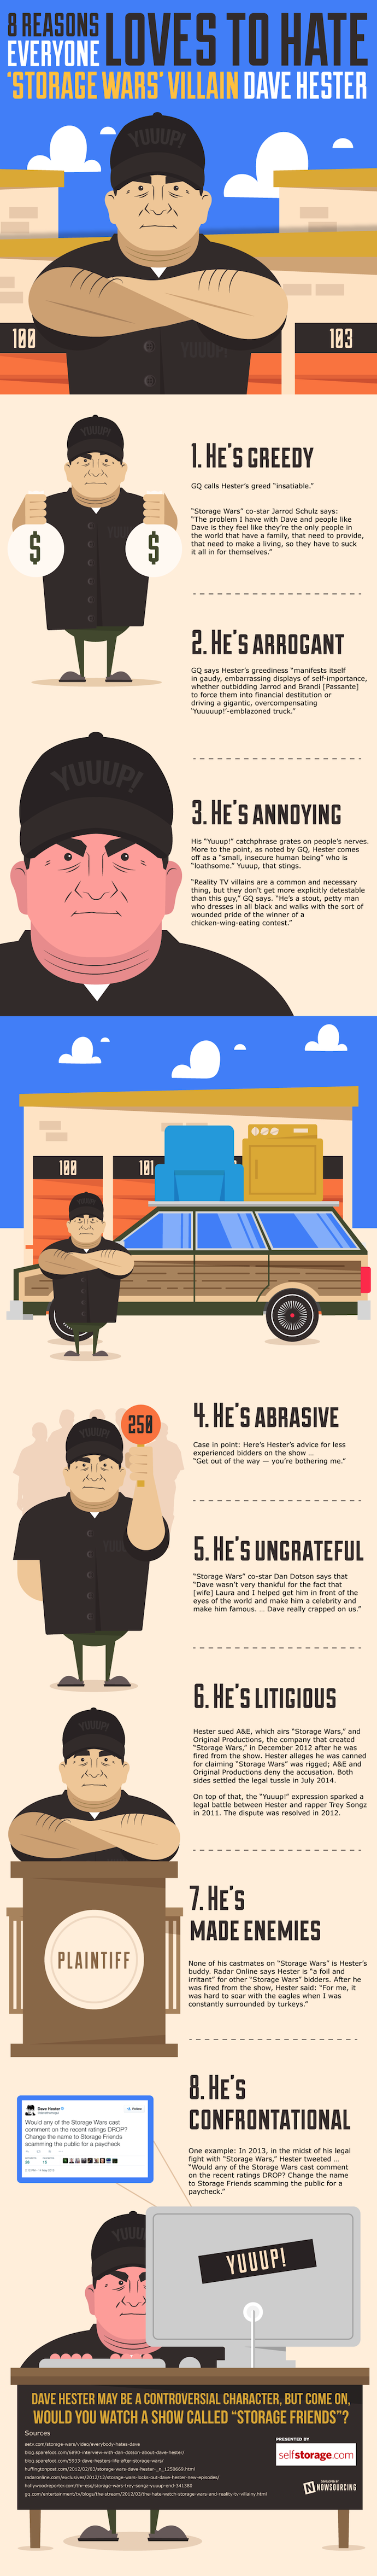 Dave Hester infographic